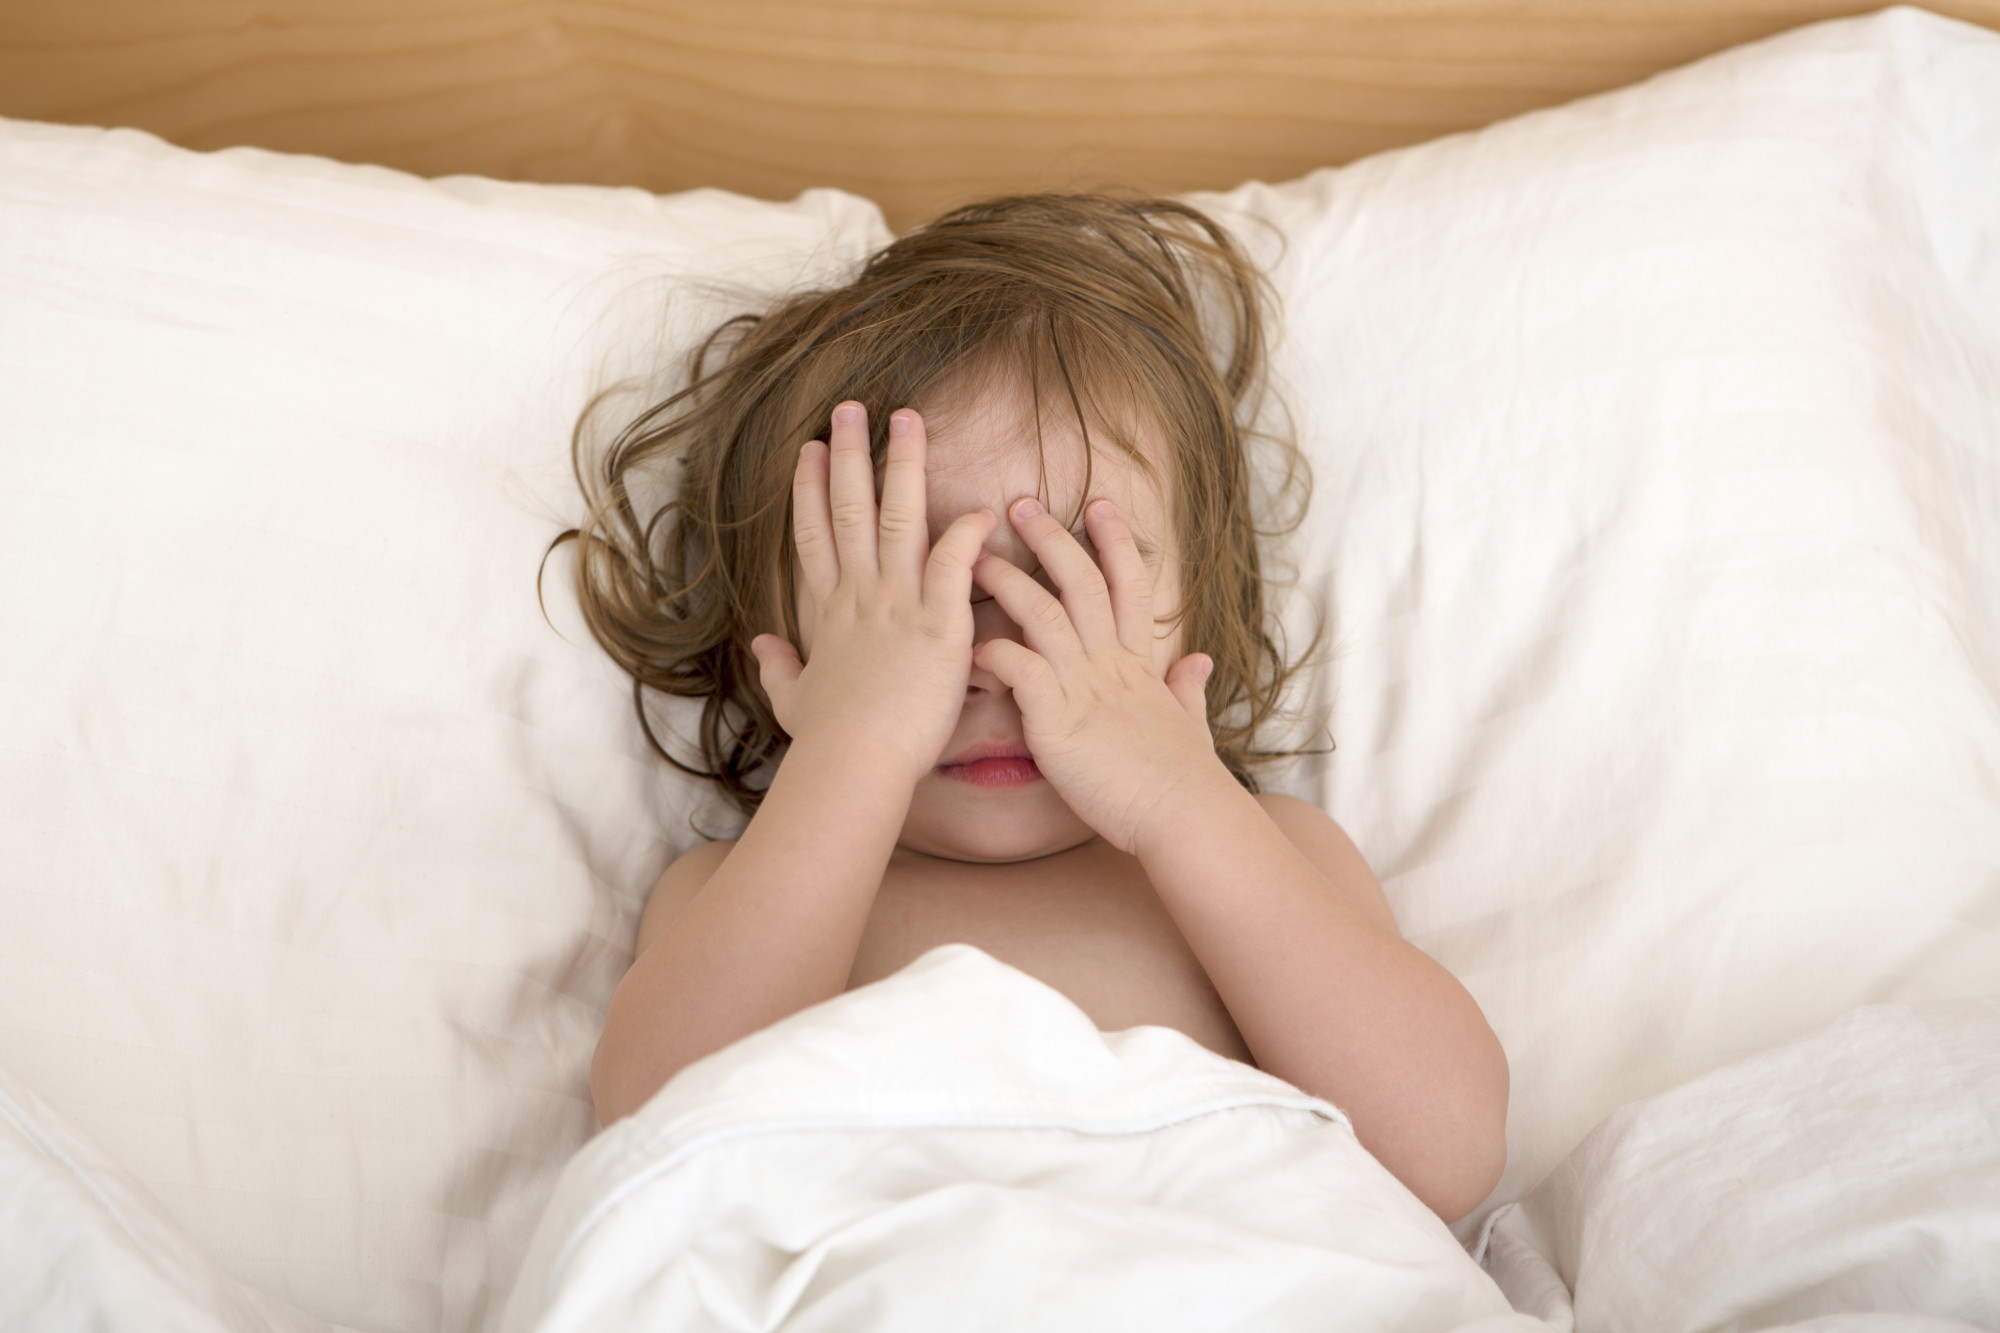 A little girl laying on a bed with white bed sheets with both hands covering her face